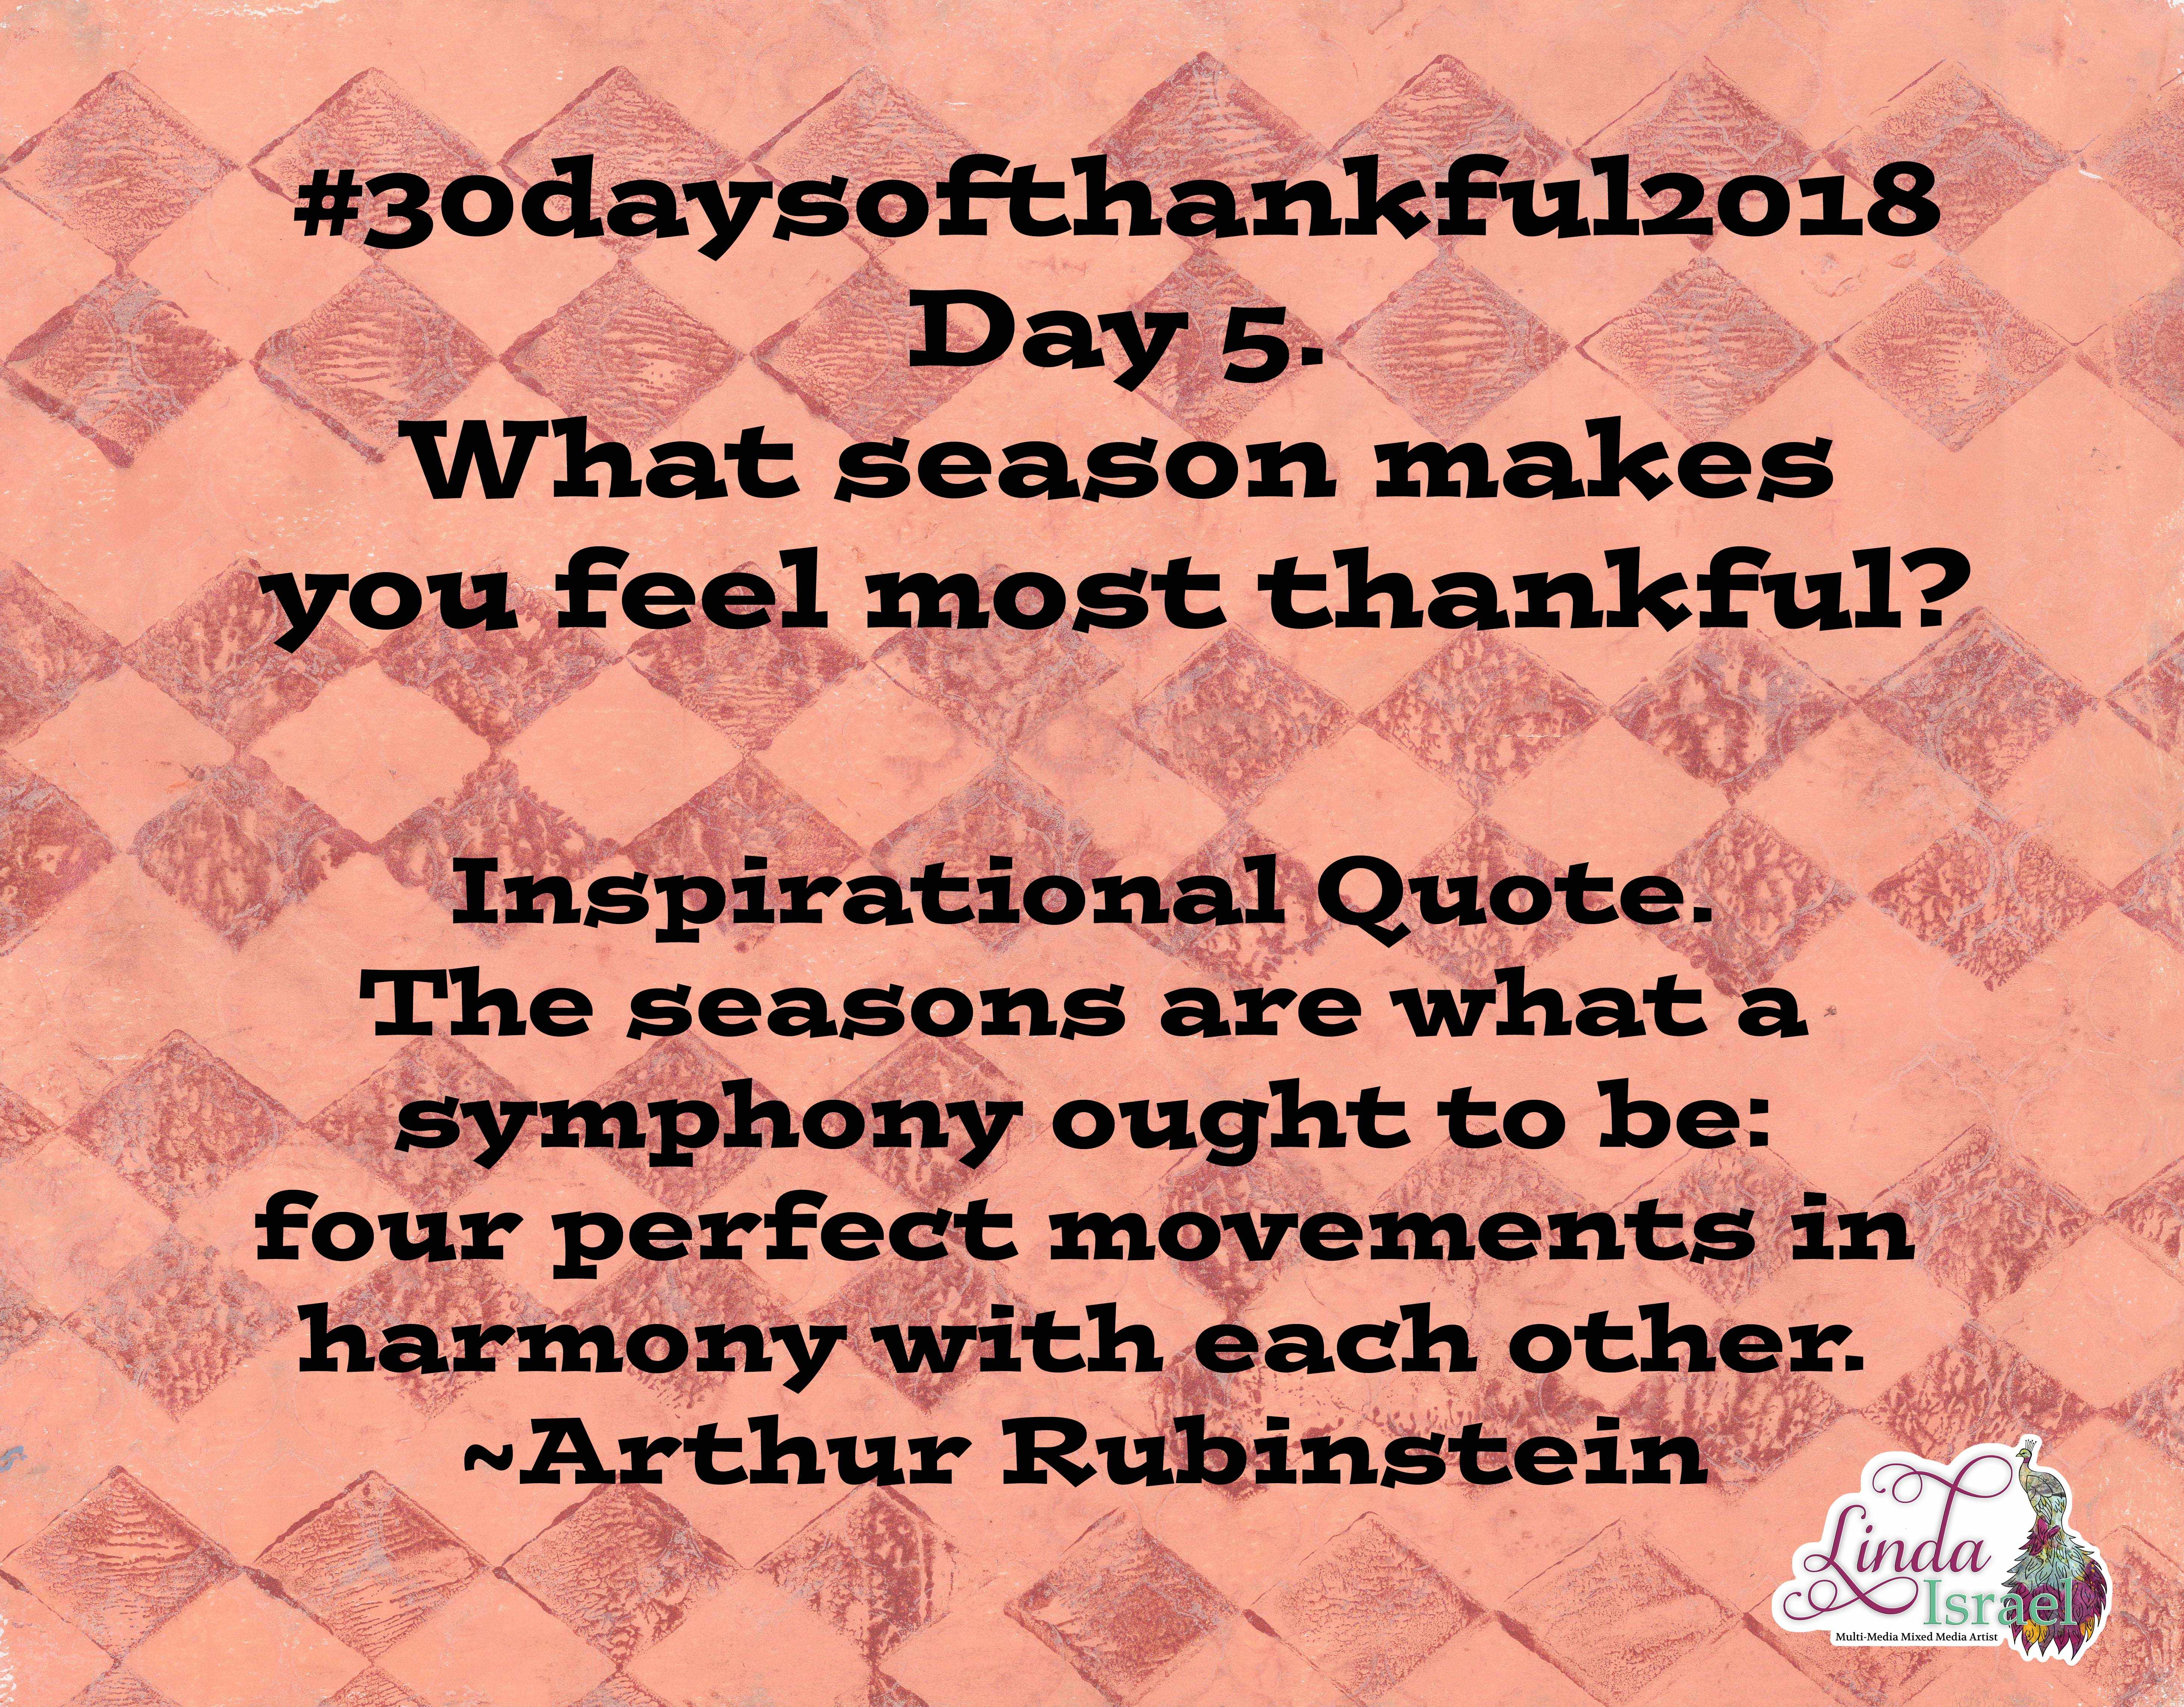 Day 5 of 30 days of Thankful 2018